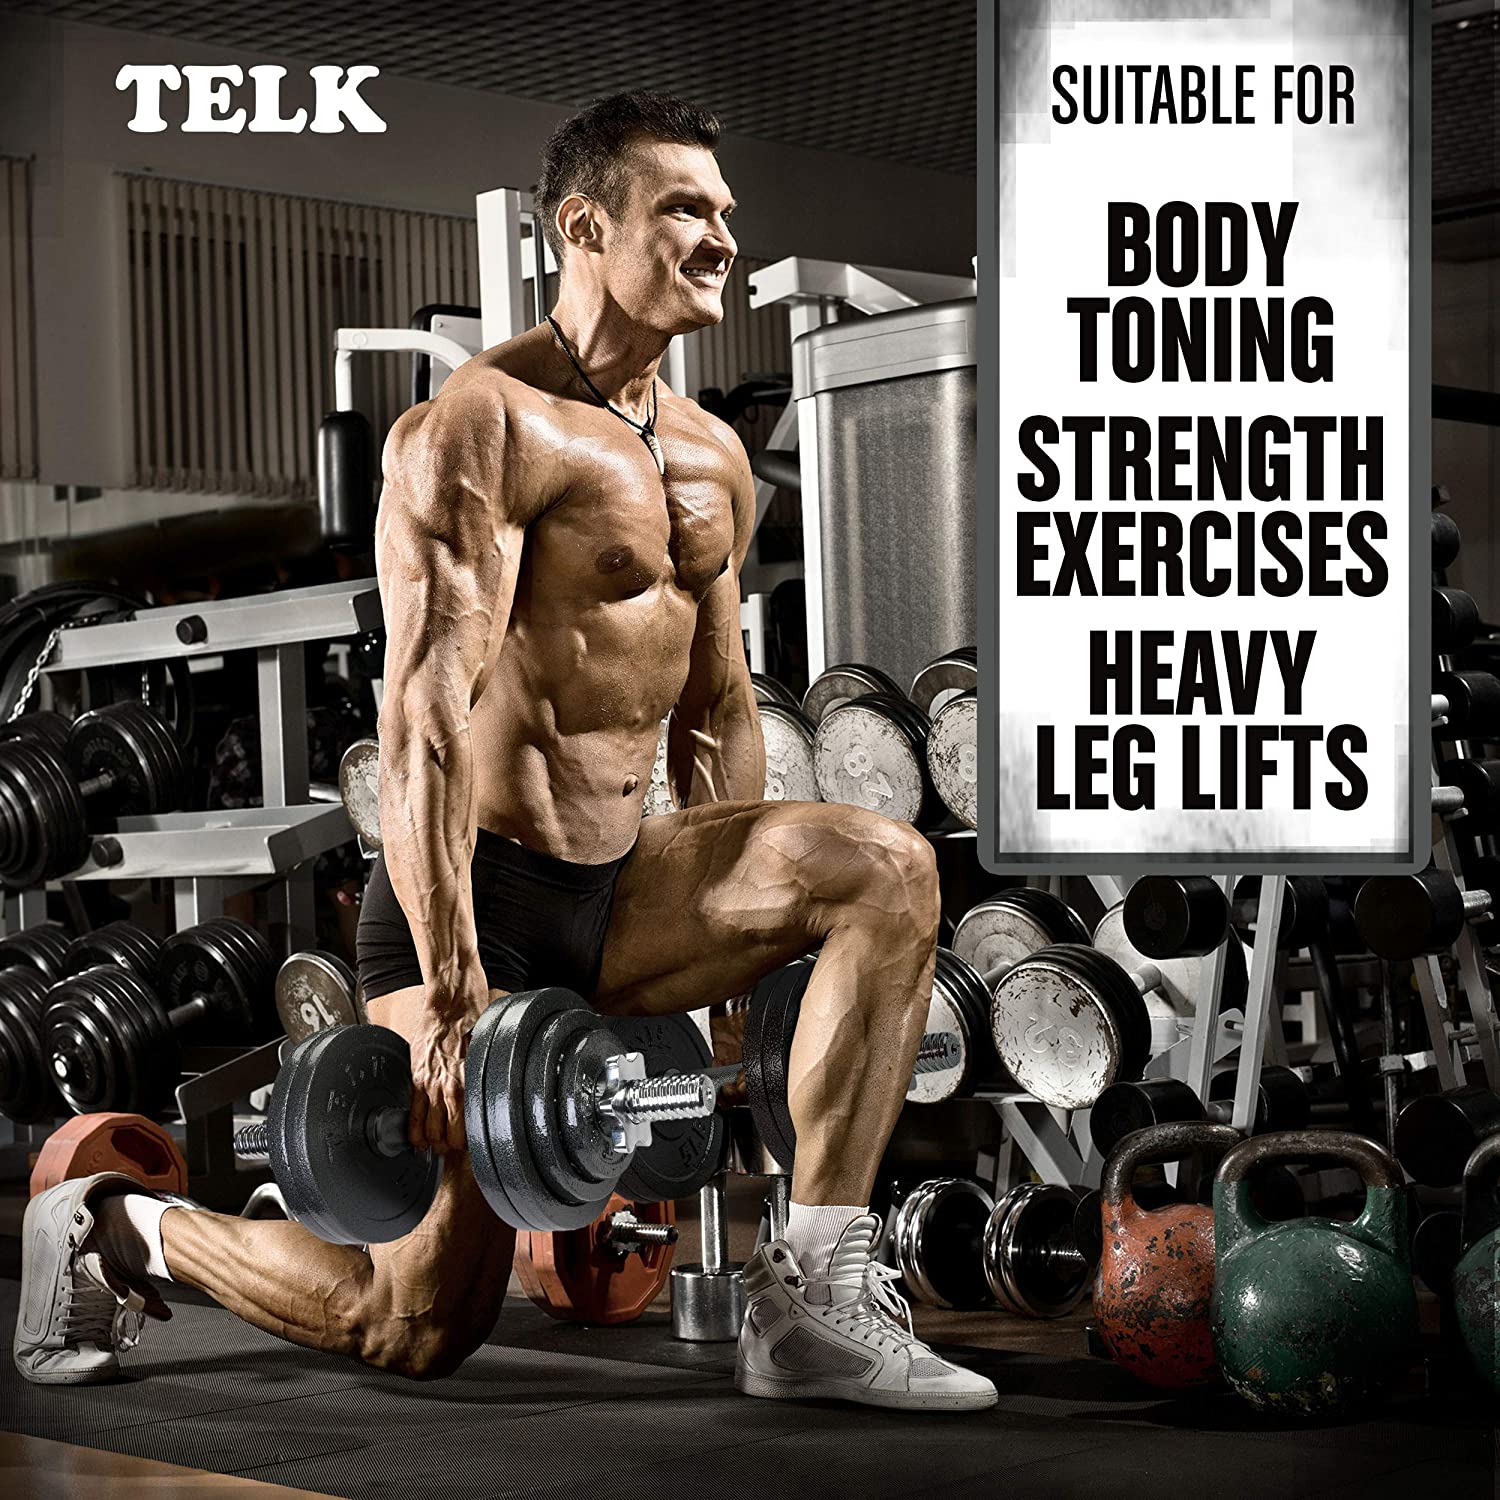 Telk Fitness, Adjustable Dumbbells 65 Lbs., Hand Weights for Home Gym - image 3 of 8